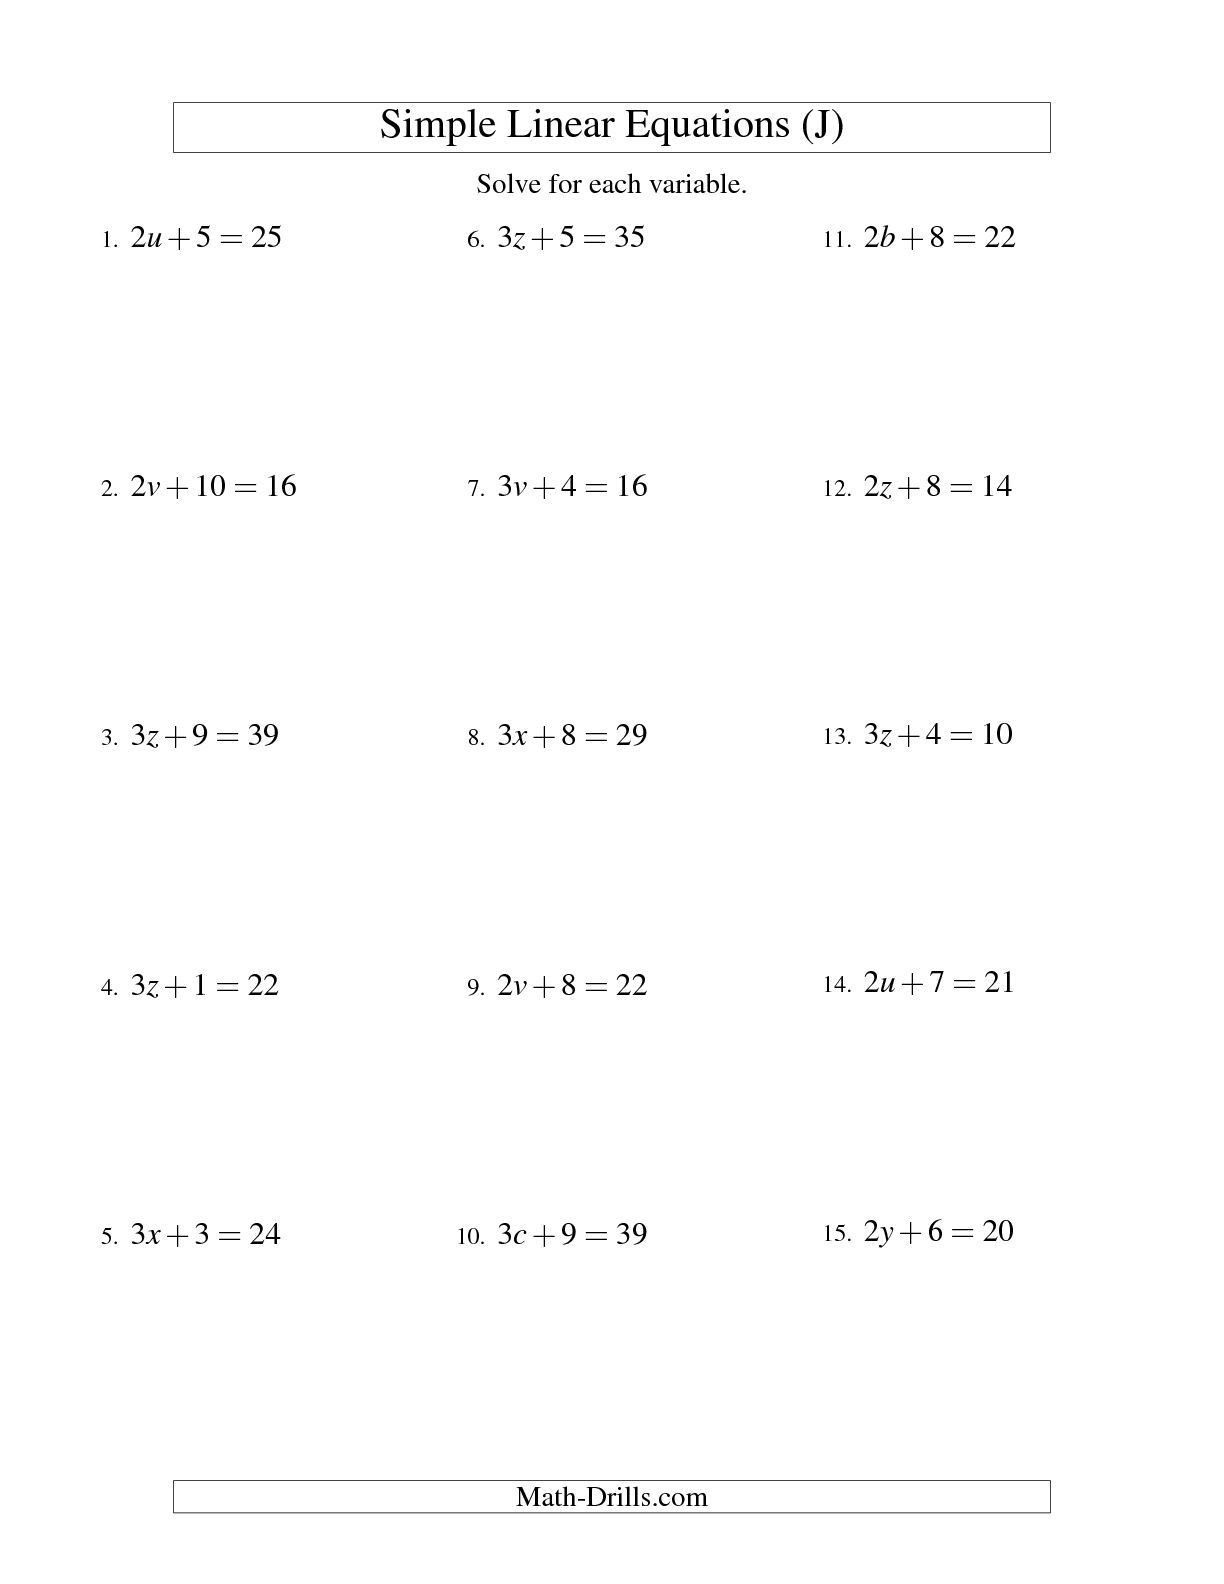 systems-of-equations-substitution-method-3-variables-worksheet-db-excel